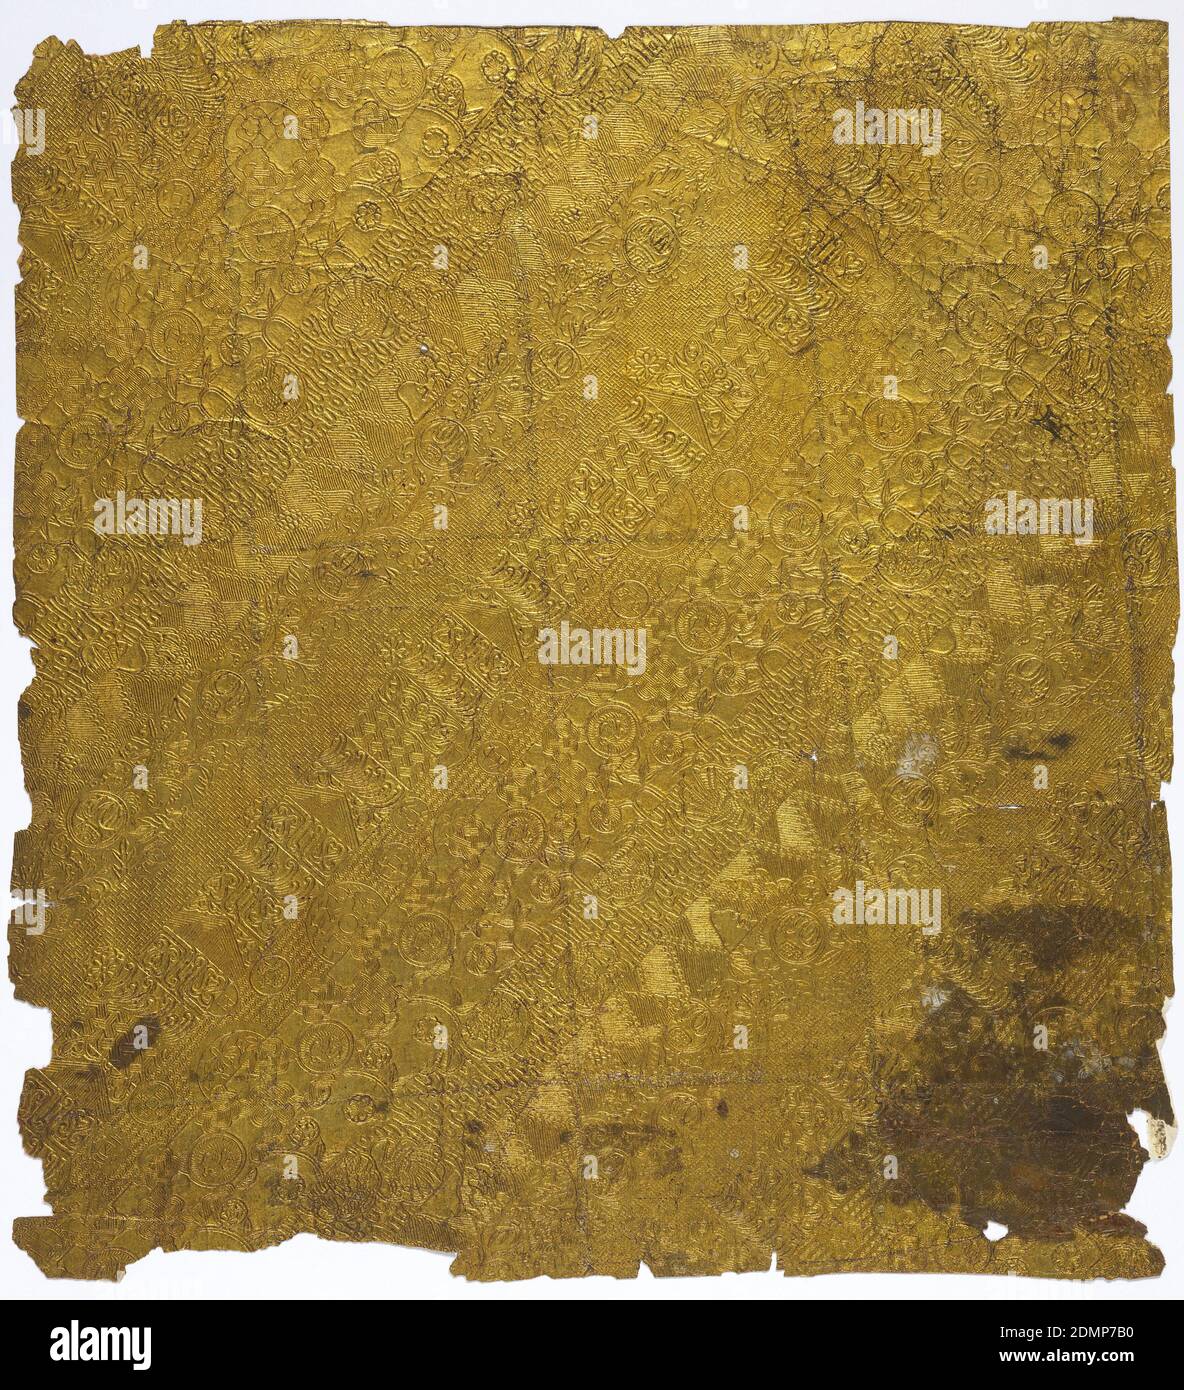 Sidewall, Gilded paper, embossed, Imitation leather. The design is composed of continuous parallel diagonal bands of ornament. There are eight different bands before the repeat. Each band is of Chinese inspired motifs, largely of fret work designs, small floral motifs and geometric patterns. This imitation leather paper is made from the pulp of the bark of the mulberry tree. It is covered with Dutch foil which is gilded and lacquered., Japan, 1875–85, Wallcoverings, Sidewall Stock Photo